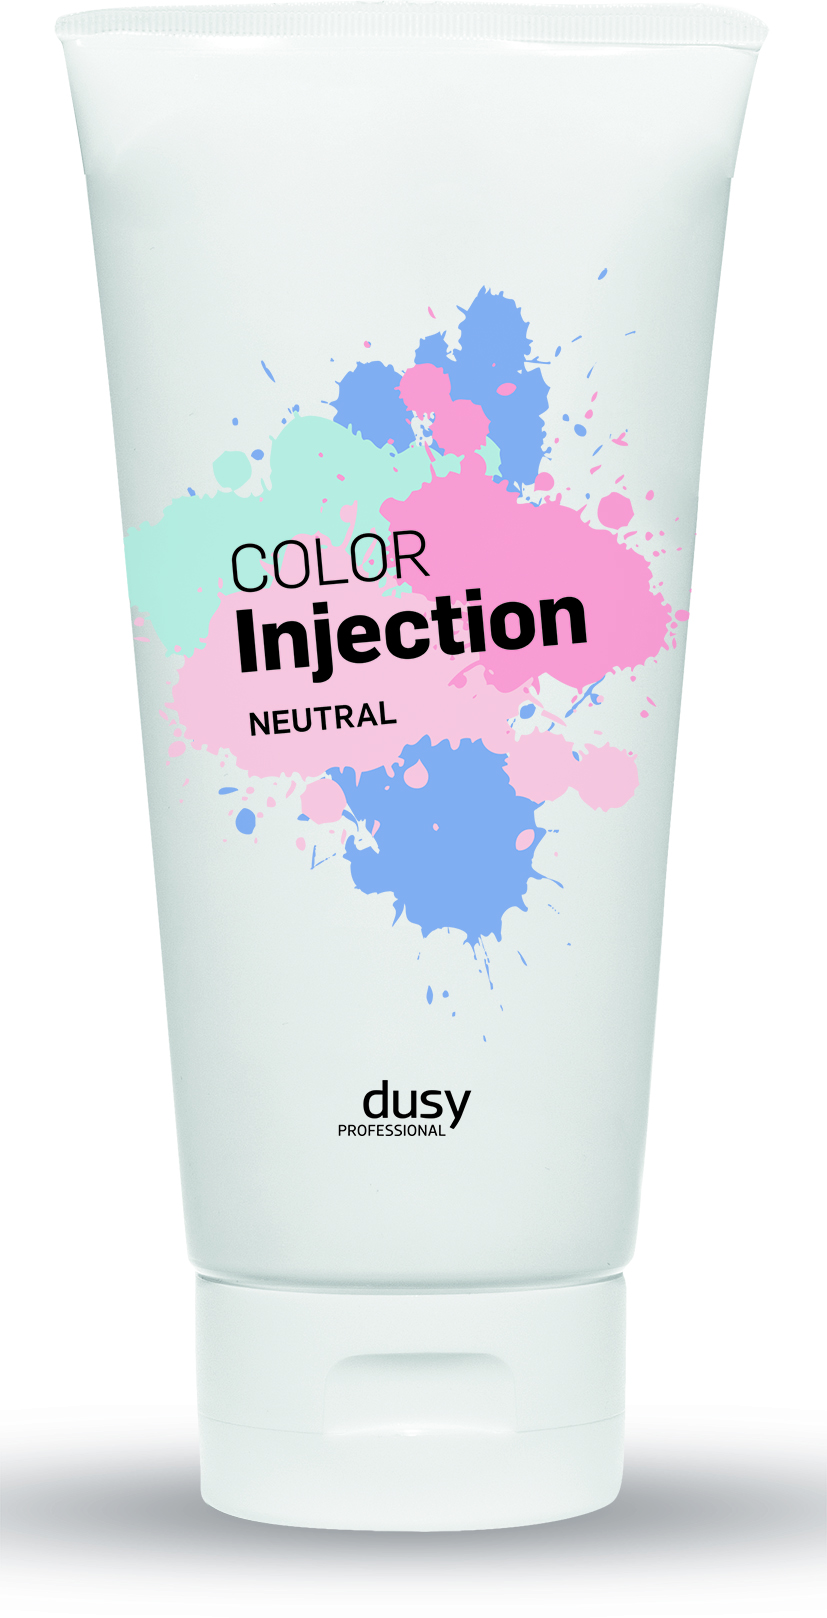 Dusy Color Injection neutral 115ml